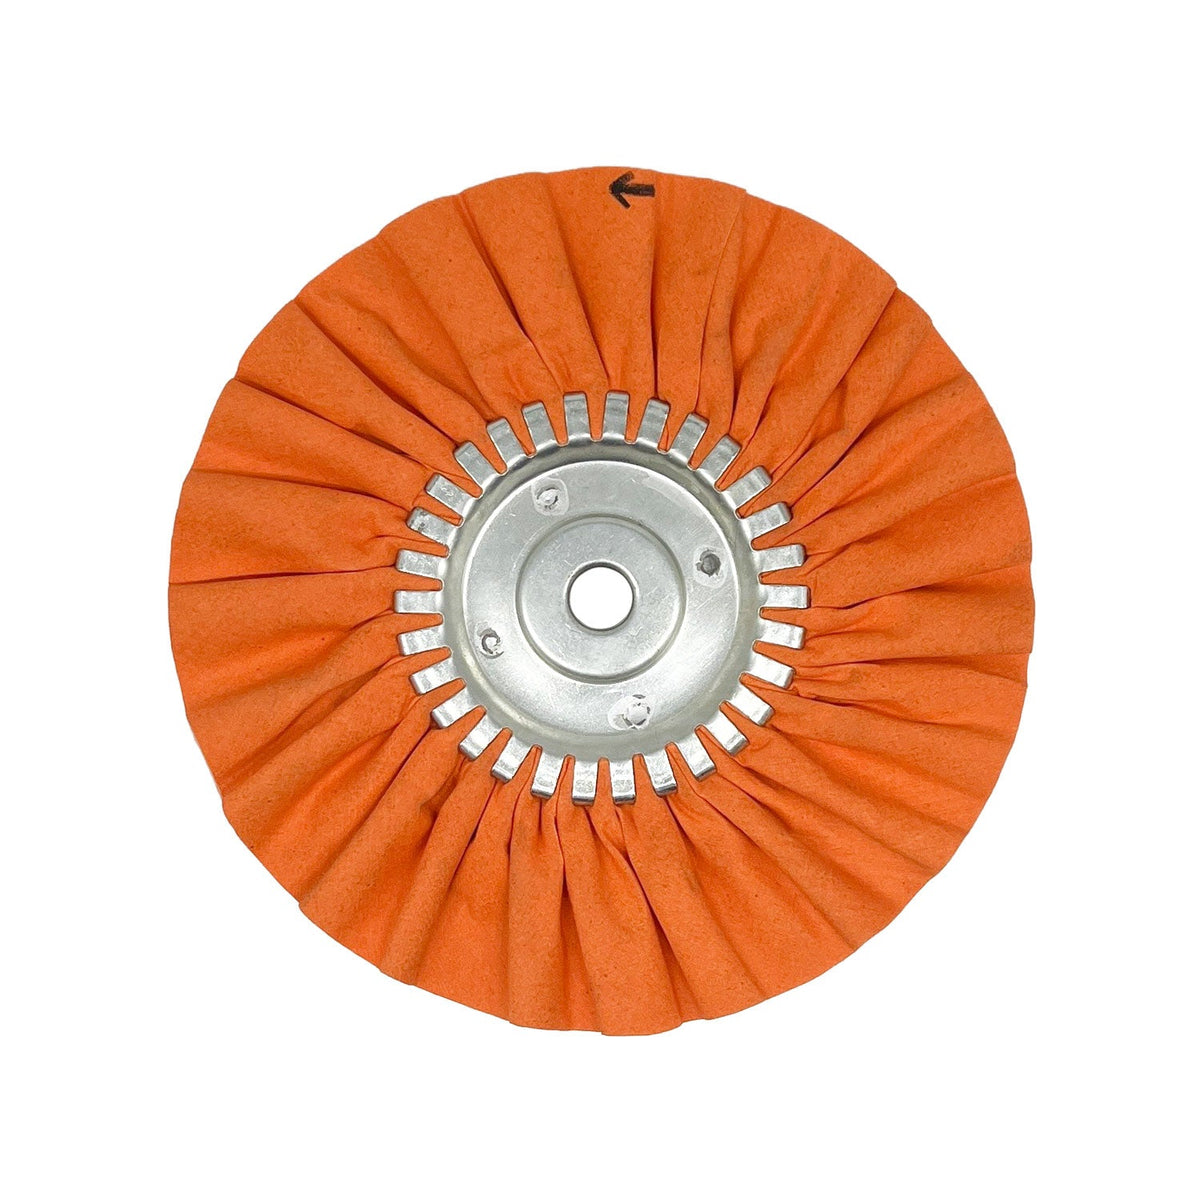 Bright orange 9-inch Solid-Center Airway Buffing Wheel from Renegade Products USA, designed for effective and smooth buffing on various surfaces.